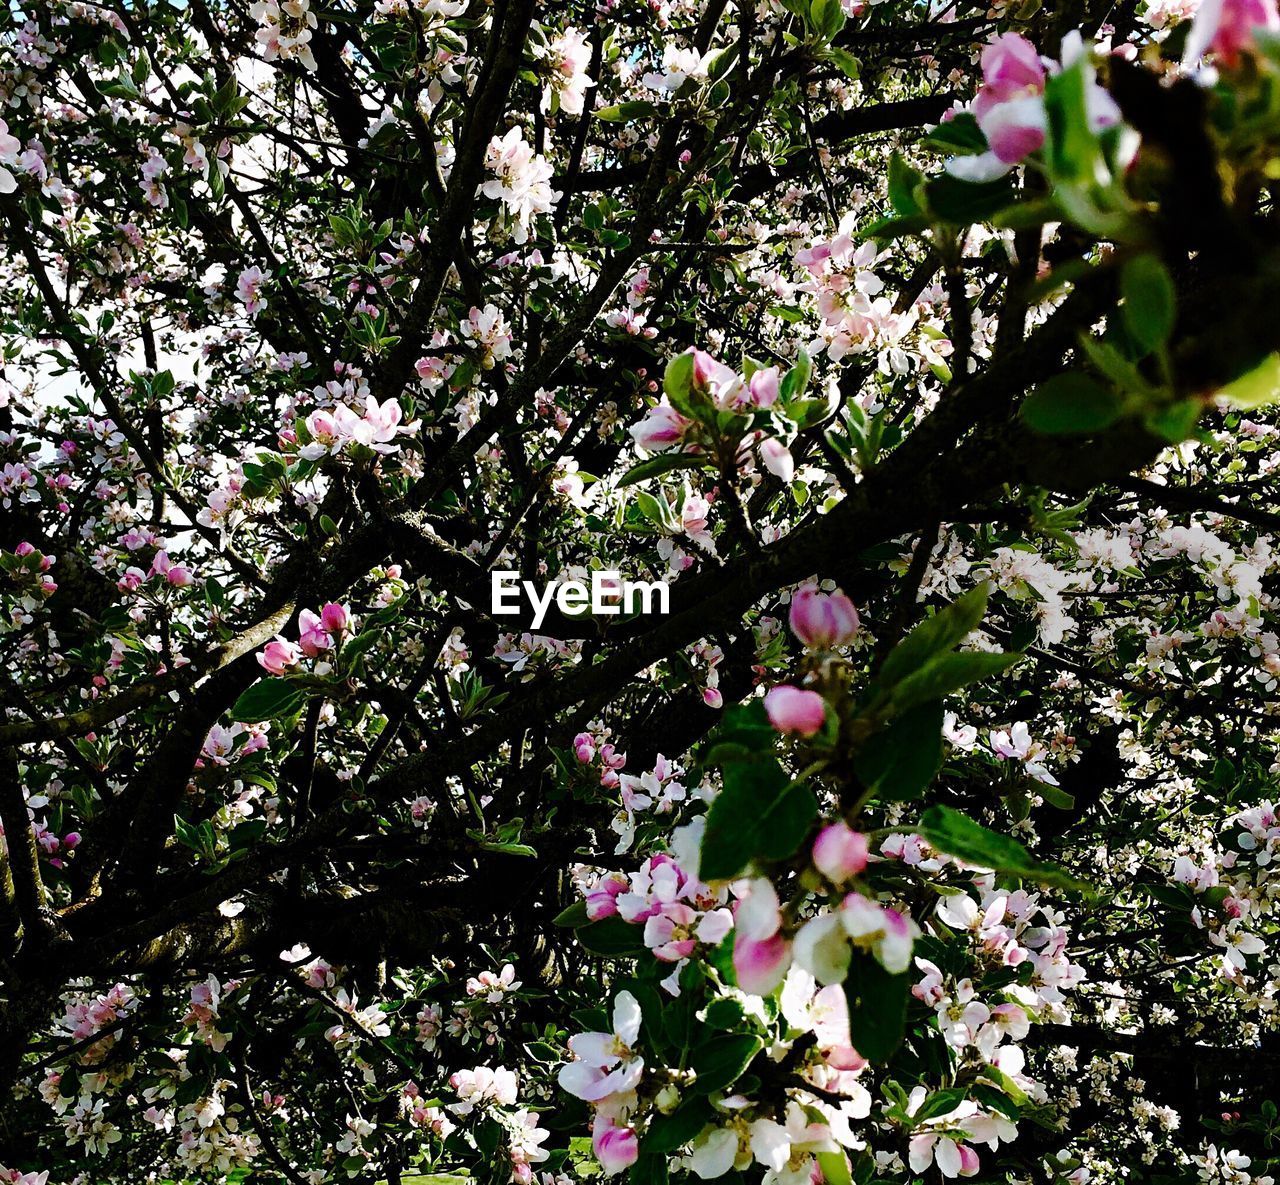 LOW ANGLE VIEW OF APPLE BLOSSOM IN SPRING